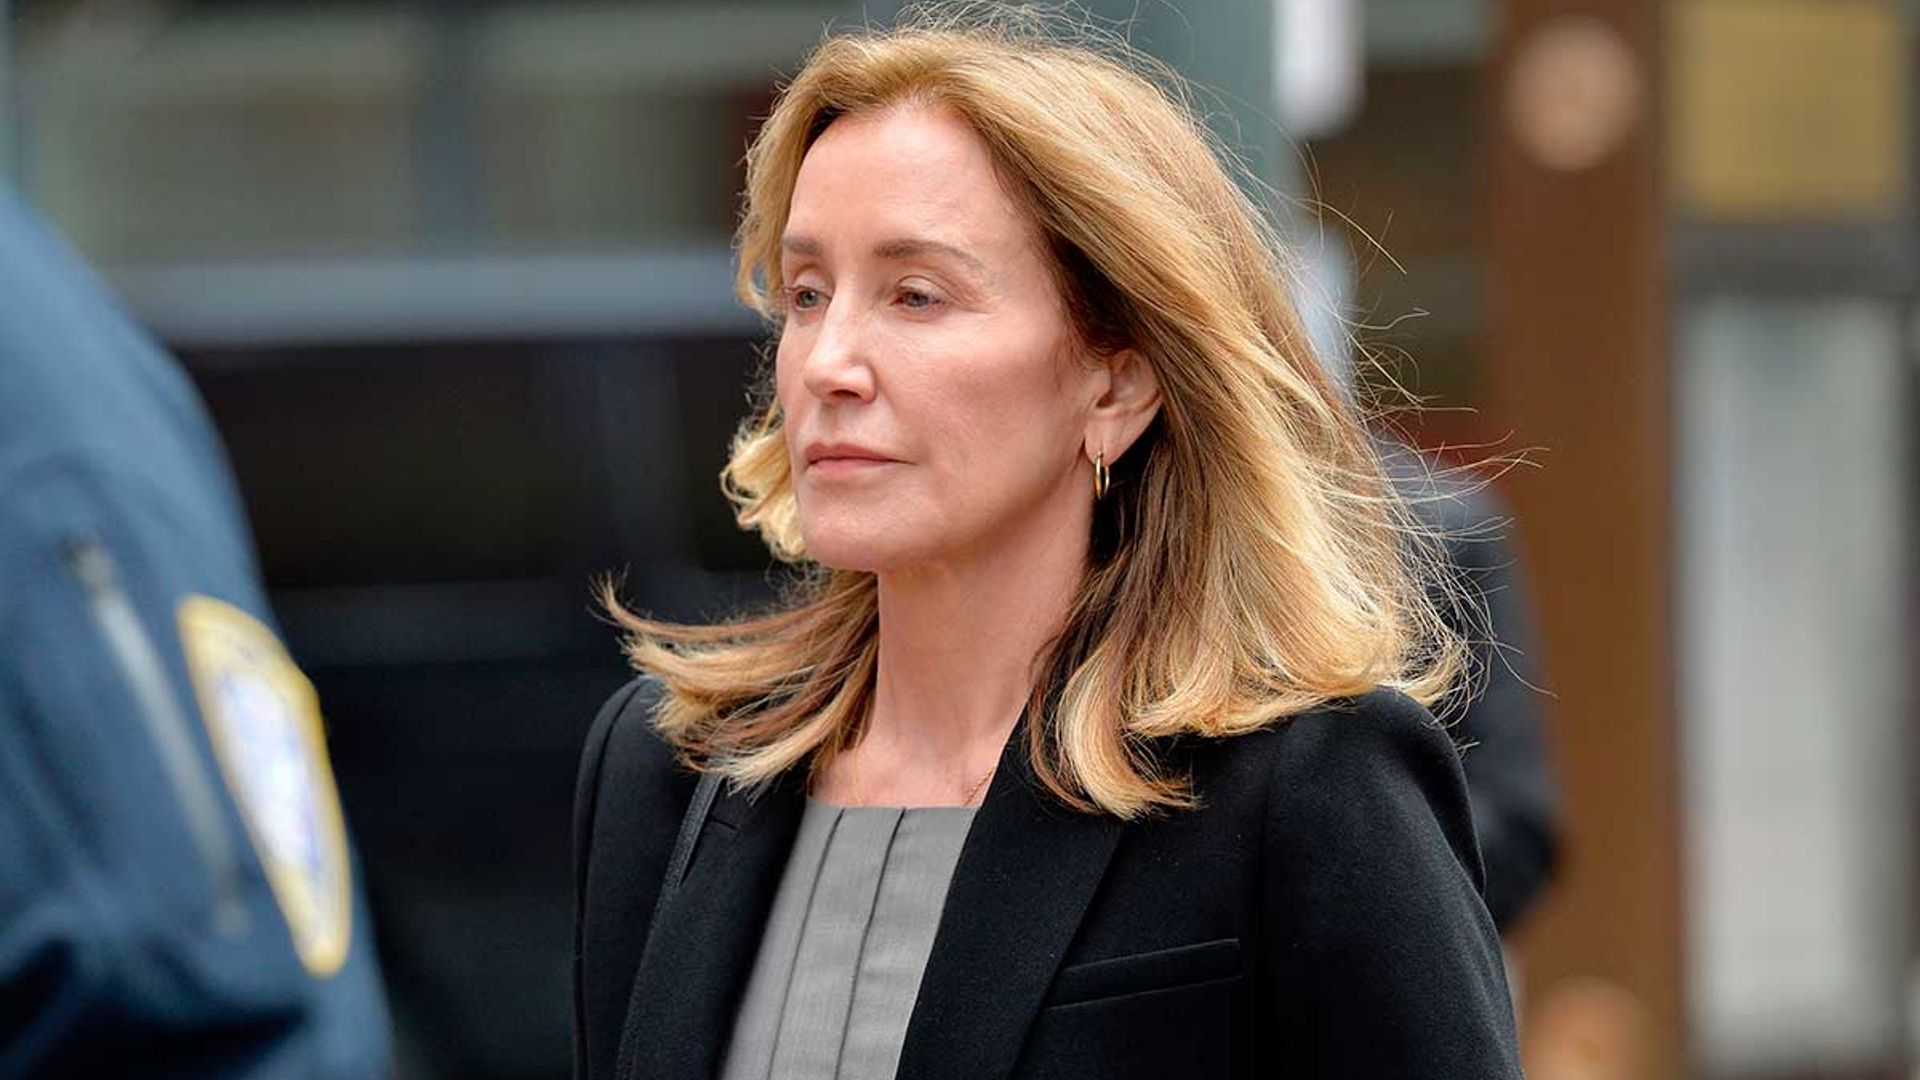 Desperate Housewives star Felicity Huffman pleads guilty in college admissions scandal